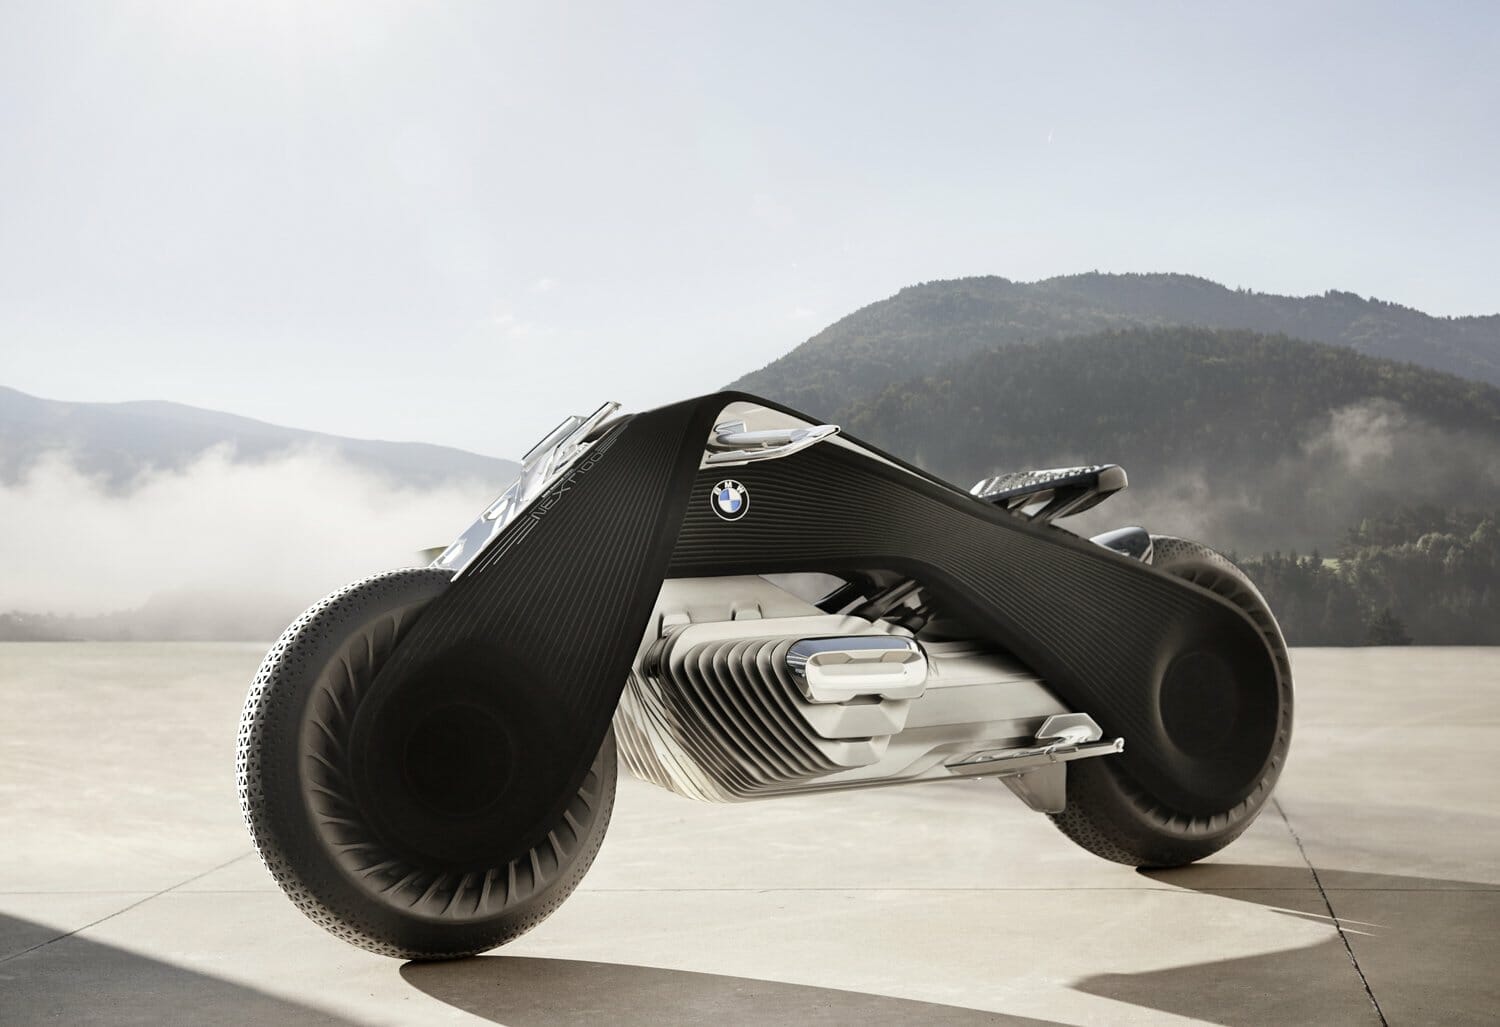 This is how BMW sees the future of motorcycles